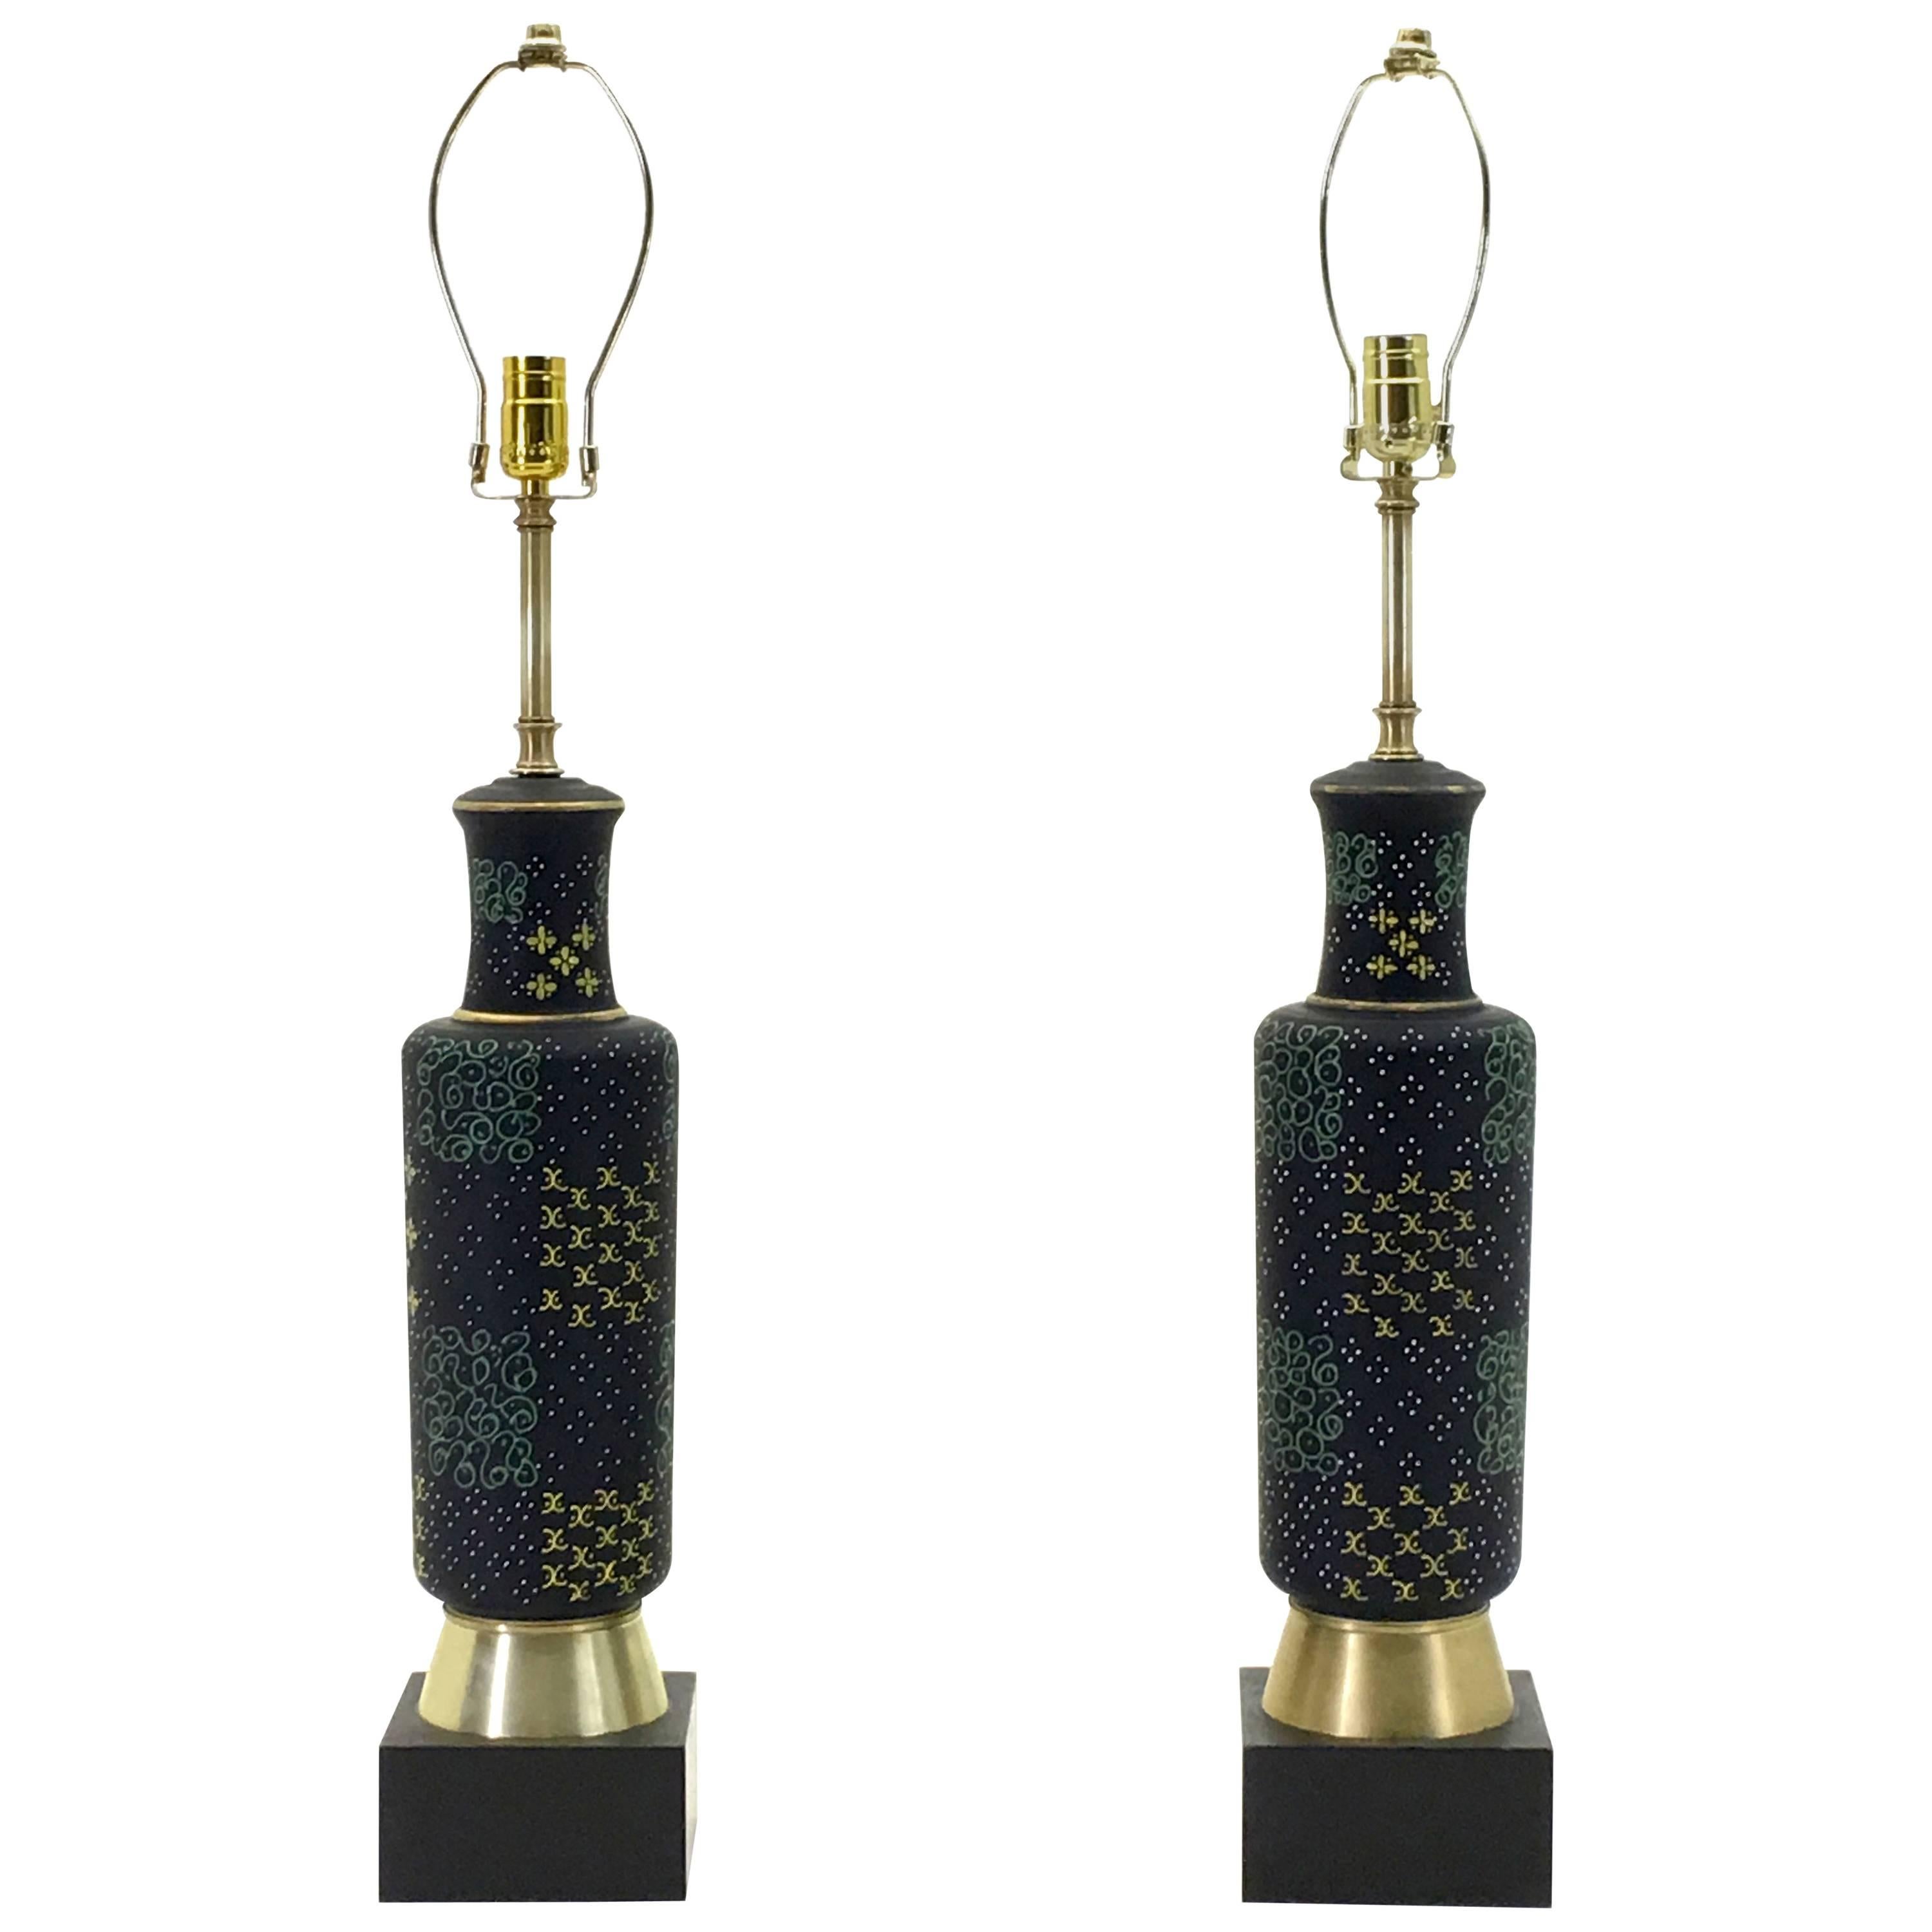 Extraordinary Pair of Art Deco Enameled Glass Lamps